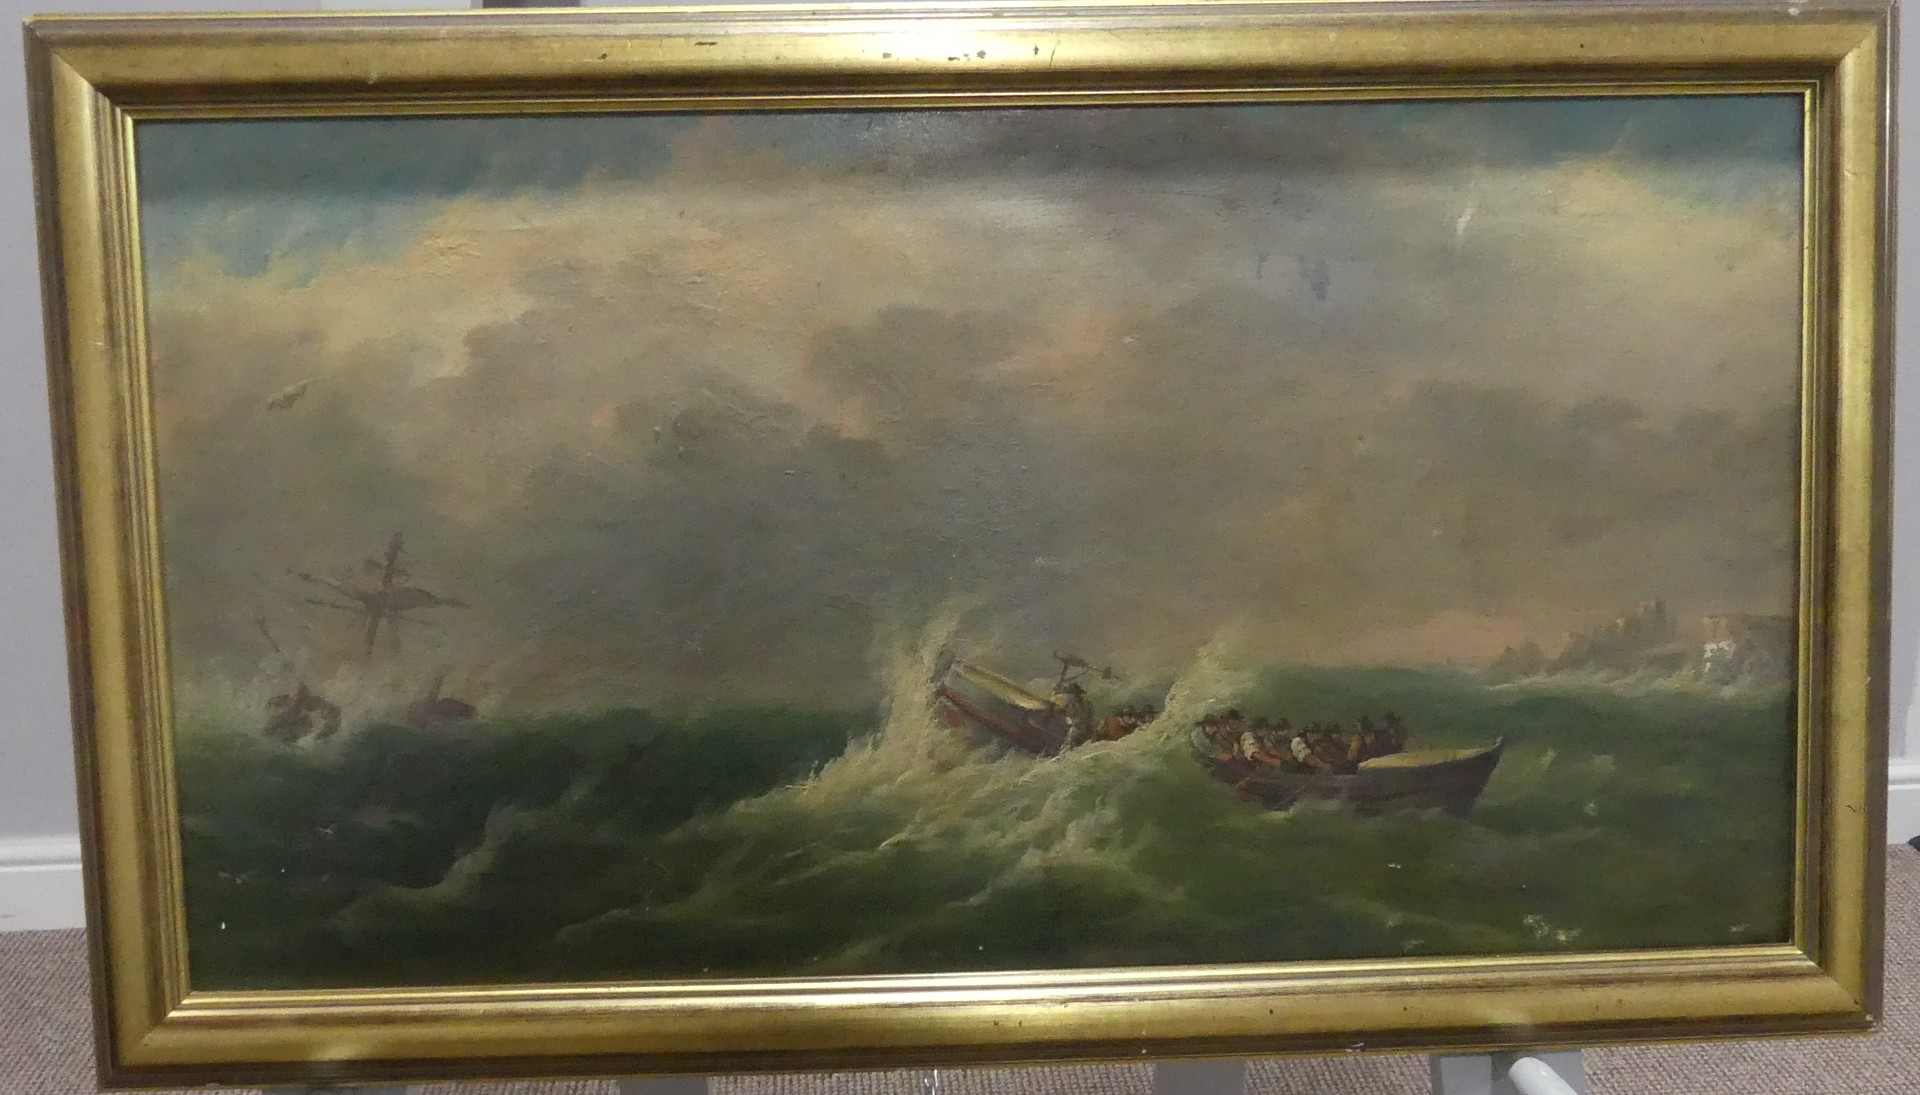 19thC school, Life boat in a stormy sea, oil on canvas, old restorations and some scuffing to